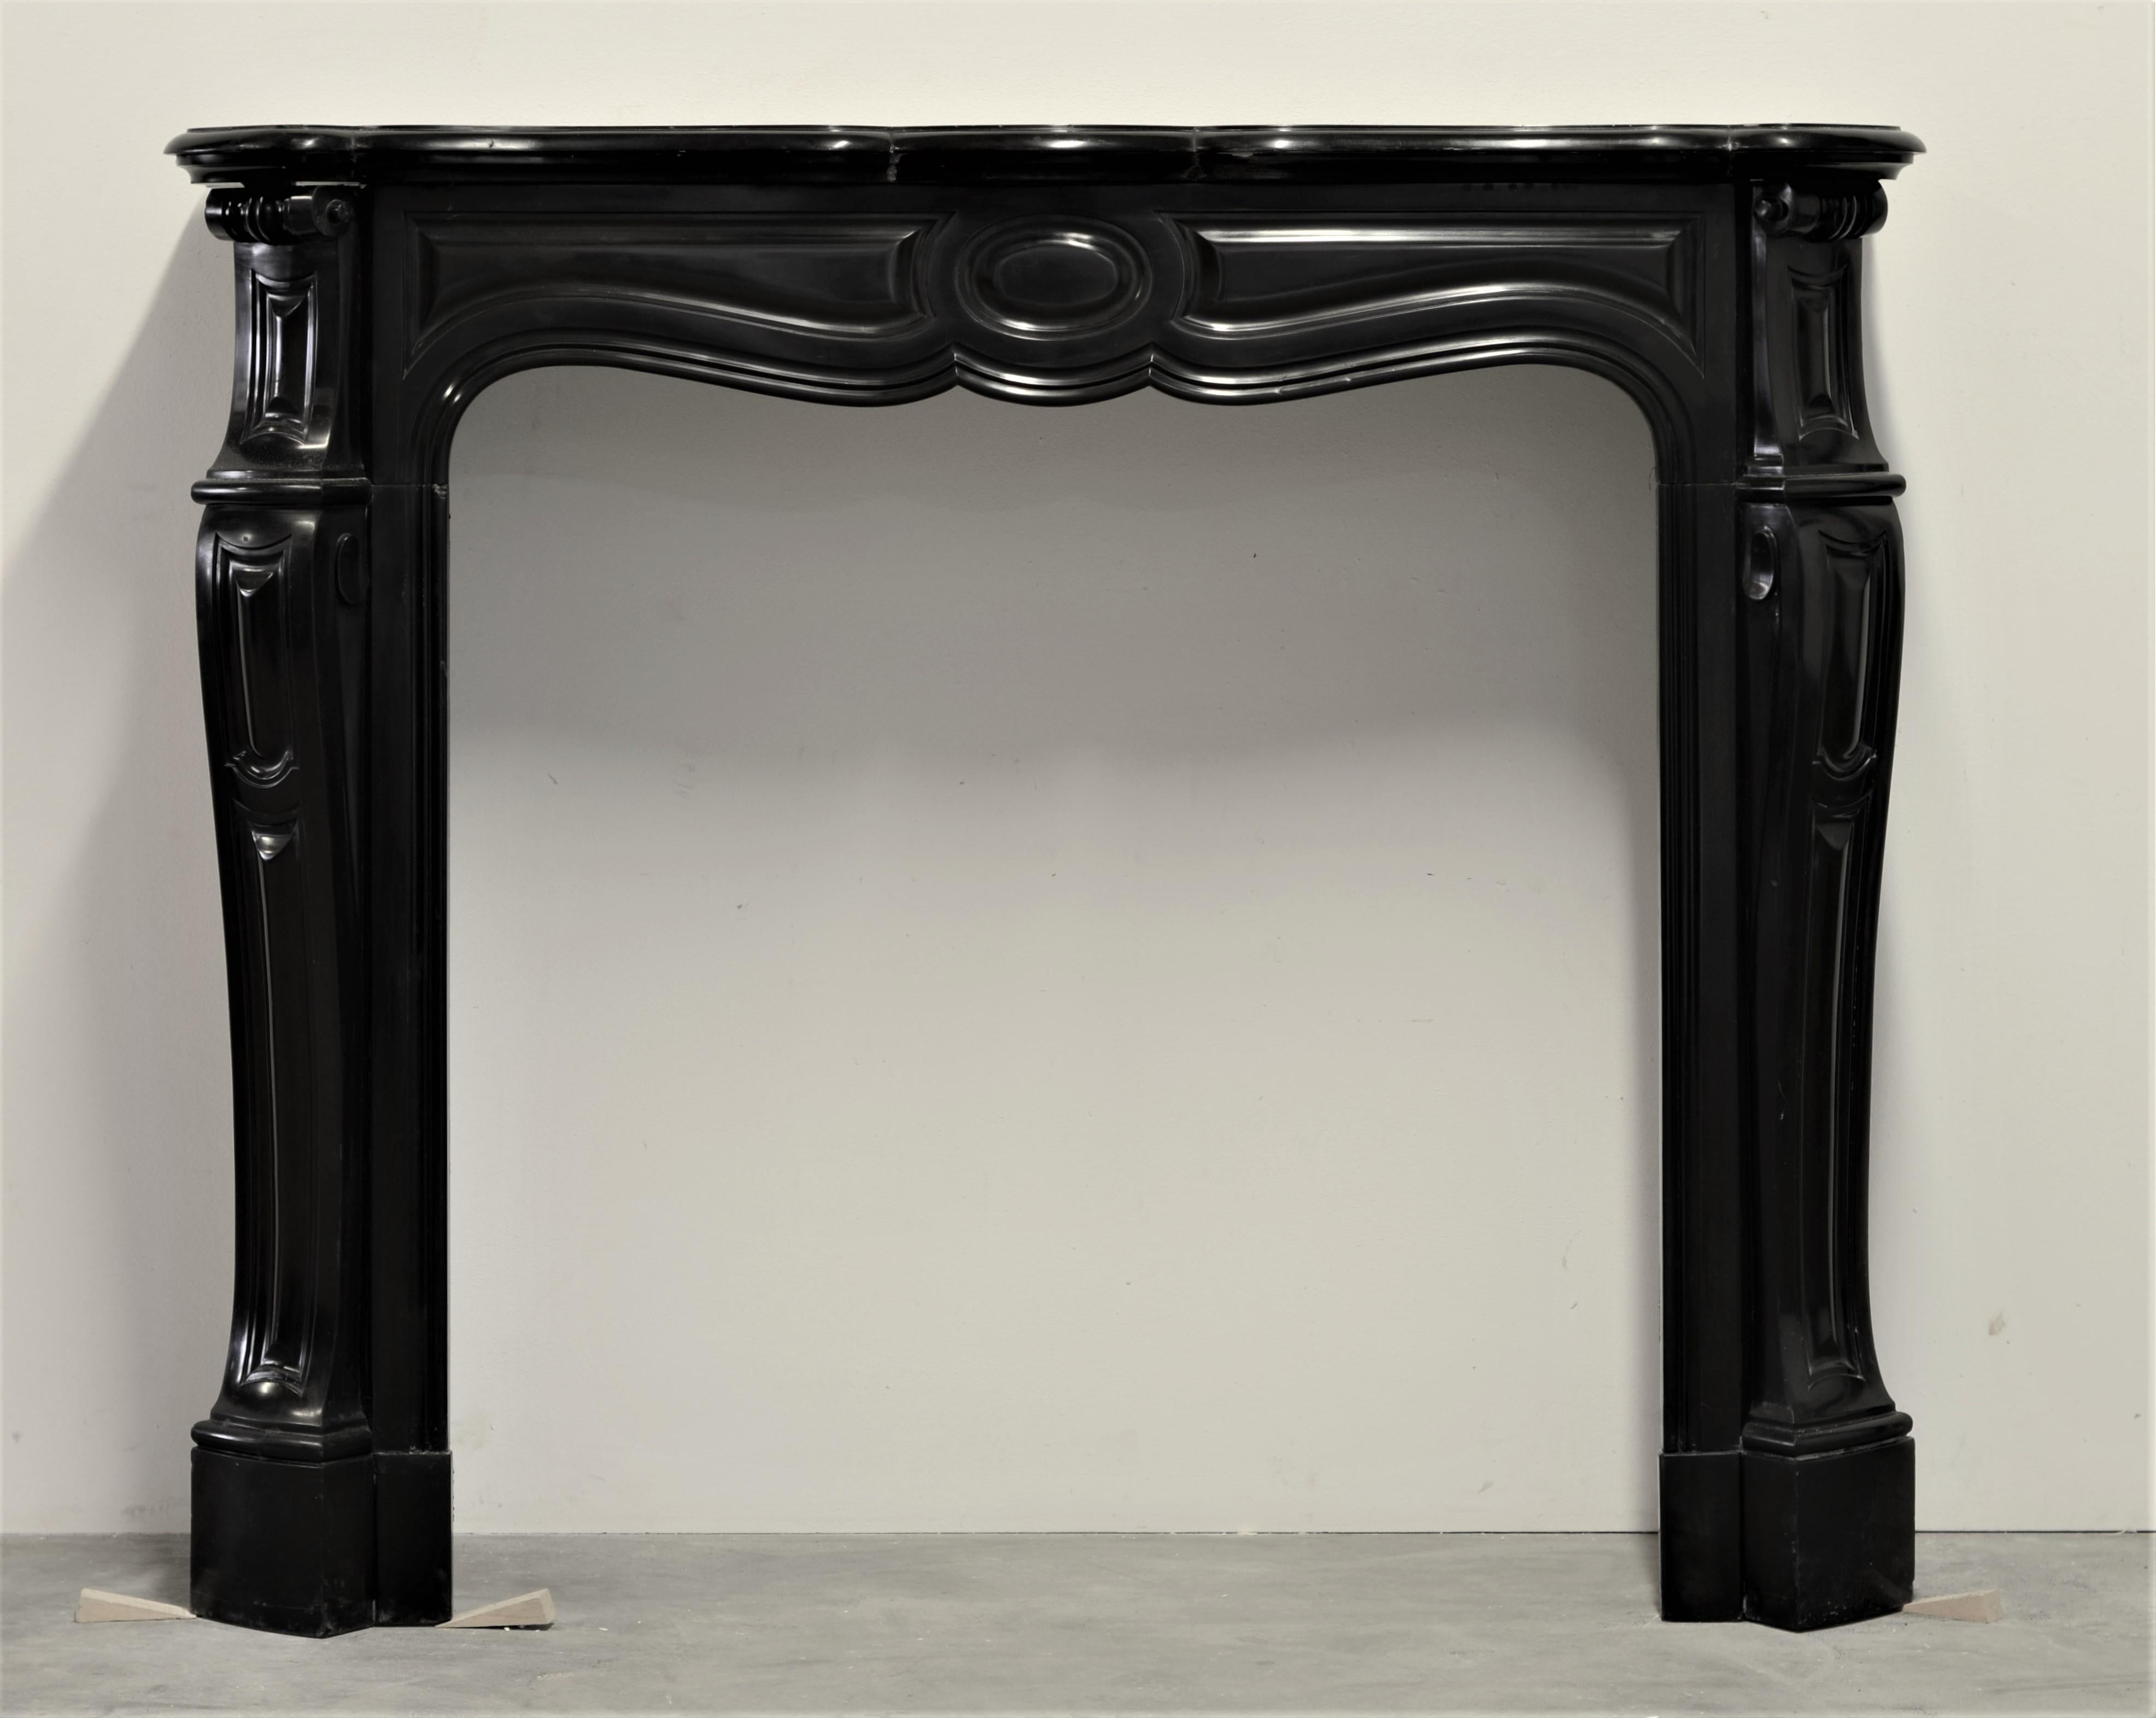 Lovely small sized Louis XV Pompadour style fireplace mantel in Belgian black marble.

The top shelf of this mantel has been professionally restored and braced, the overall condition of the mantel is very good.

Because of it’s seize and ratio